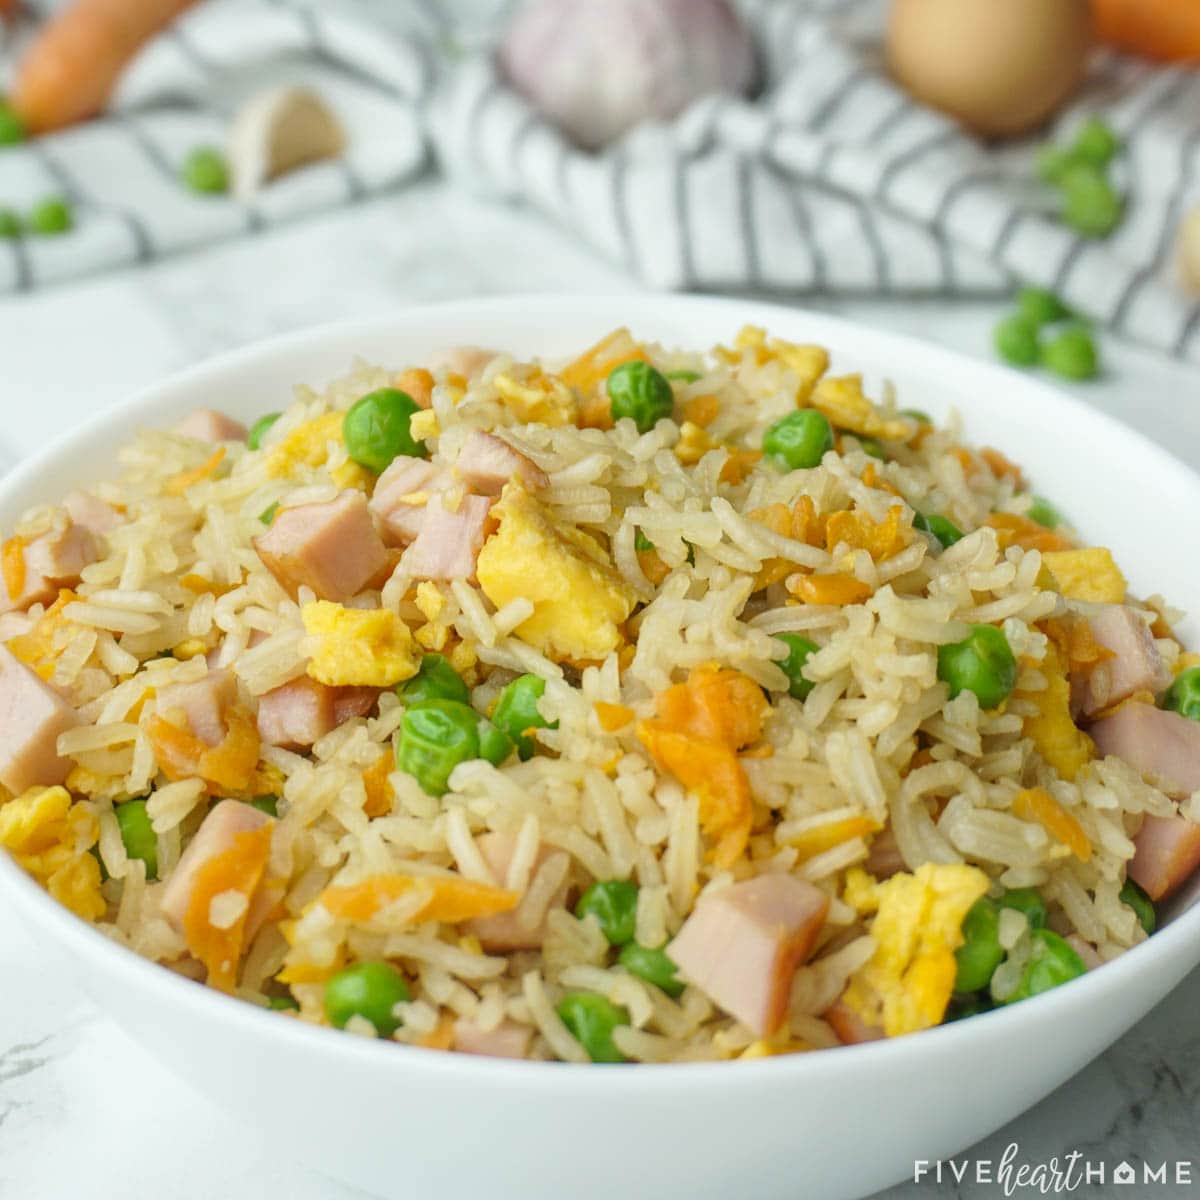 Fried rice recipe easy in bowl.